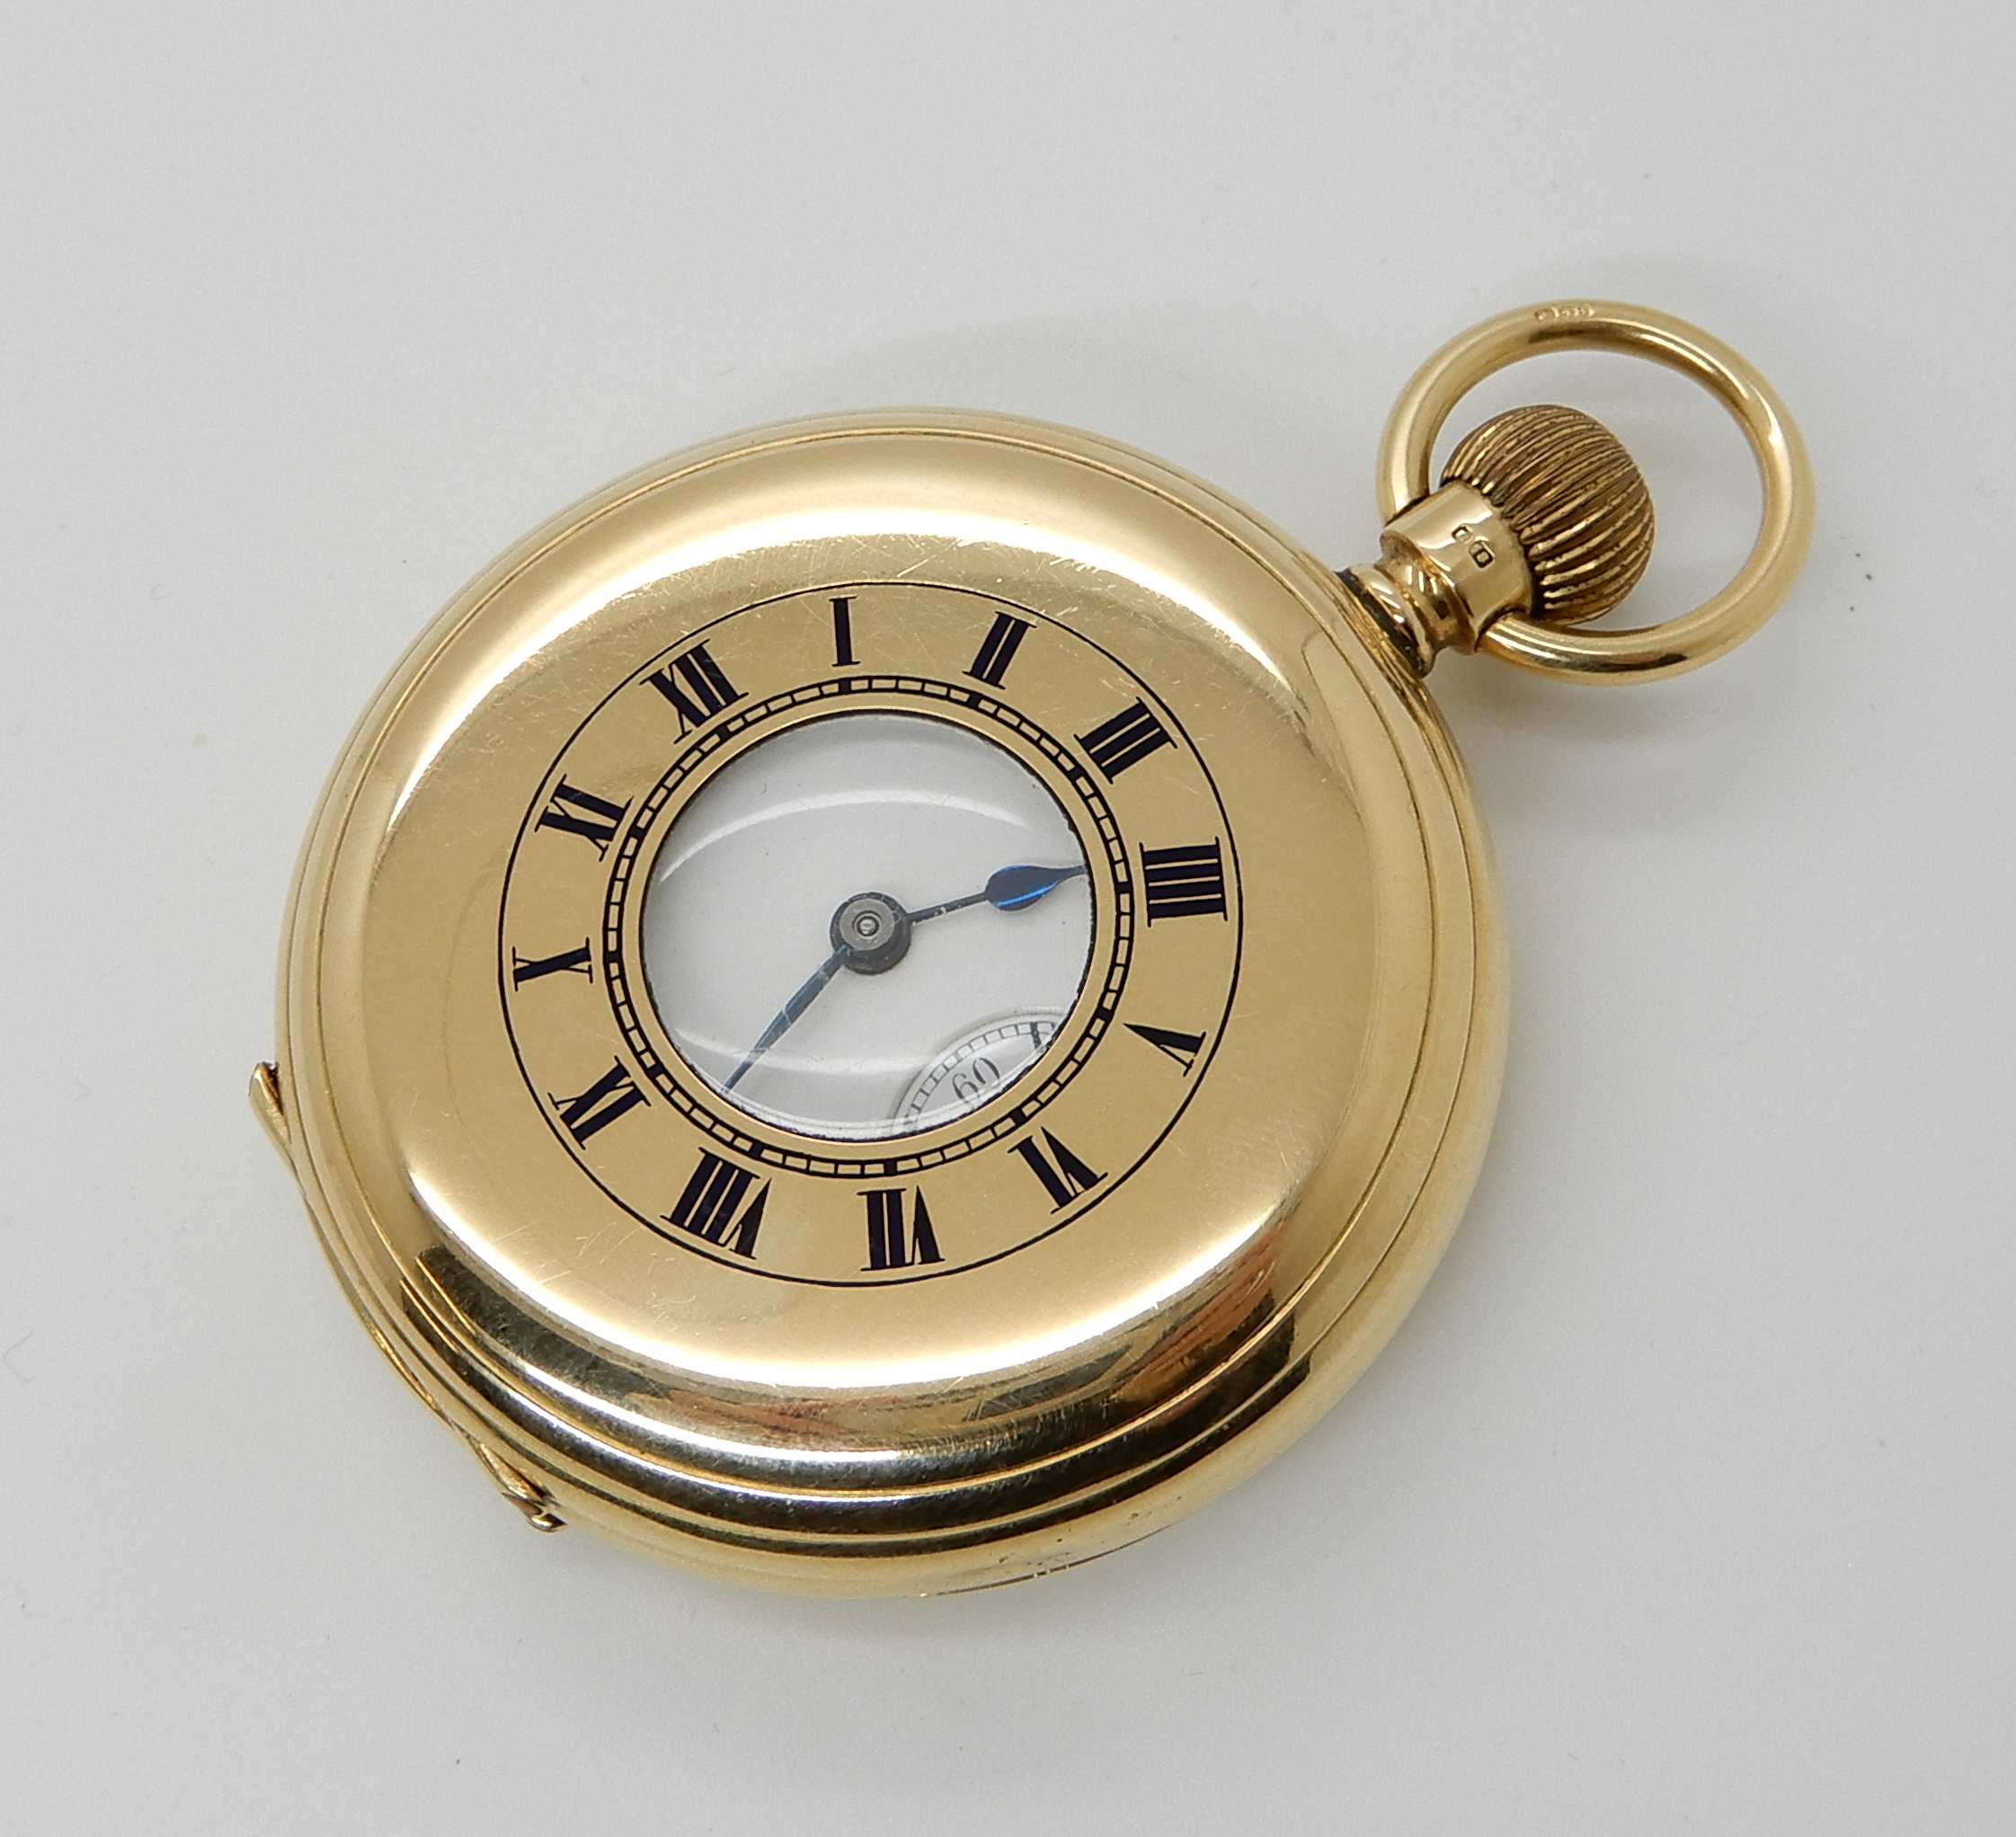 AN 18CT GOLD WALTHAM HALF HUNTER POCKET WATCH with white enamel dial, black Roman numerals,